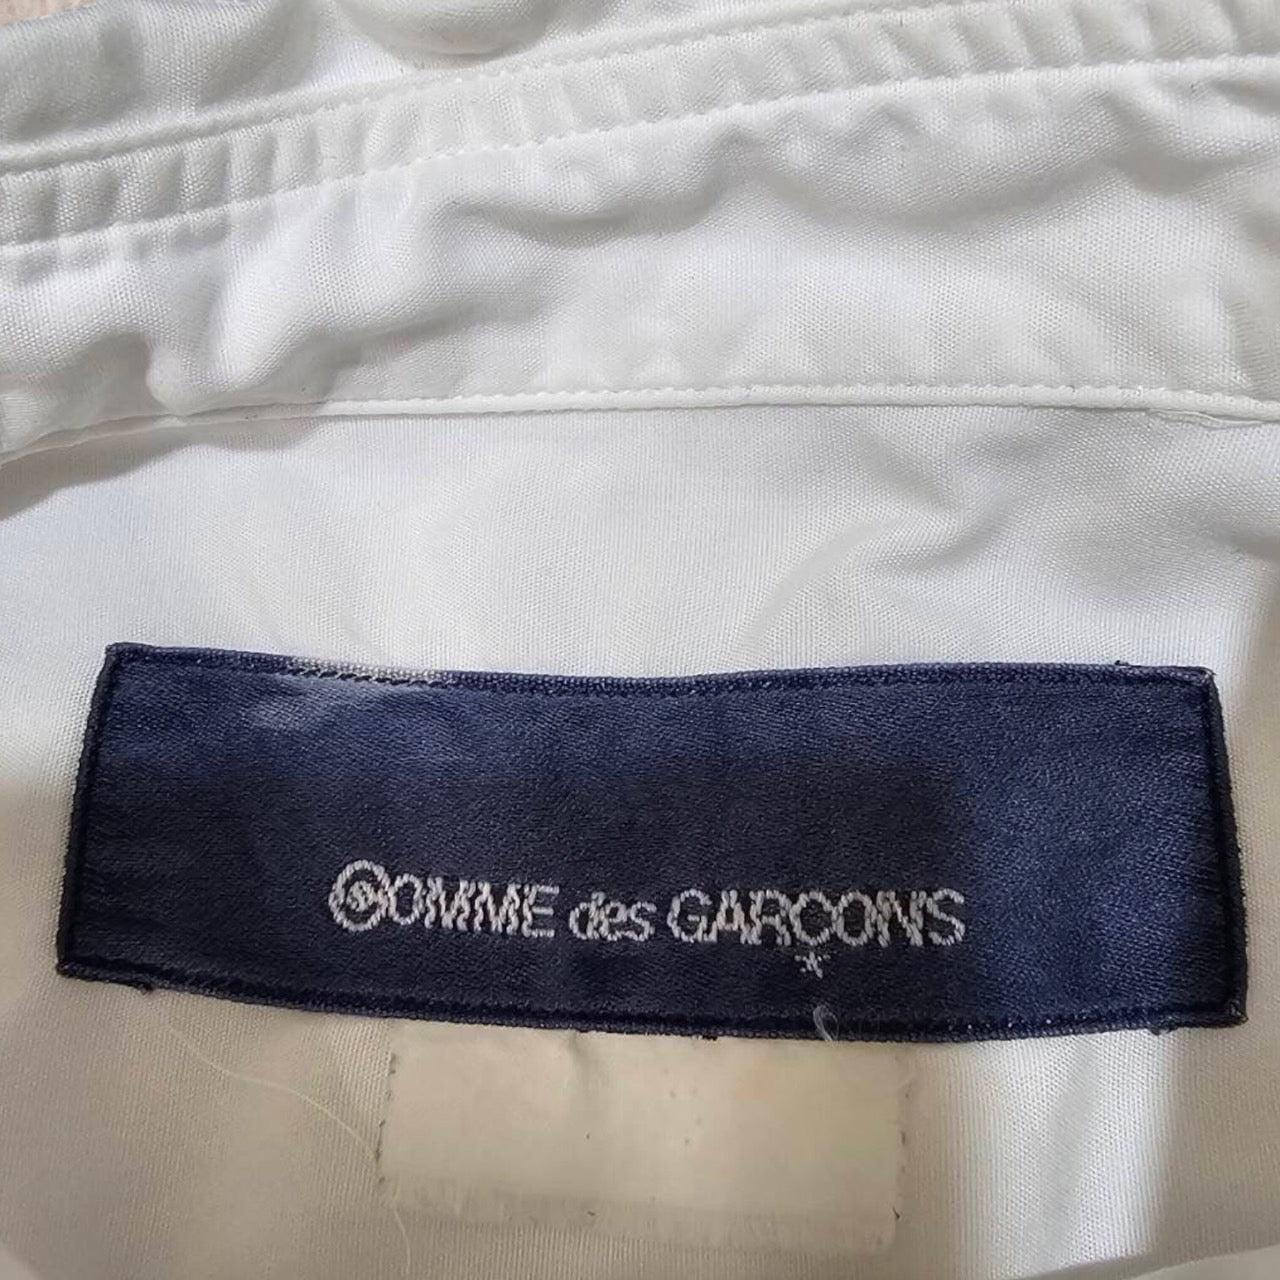 COMME des GARCONS(コムデギャルソン) 02's aoyama limited edition